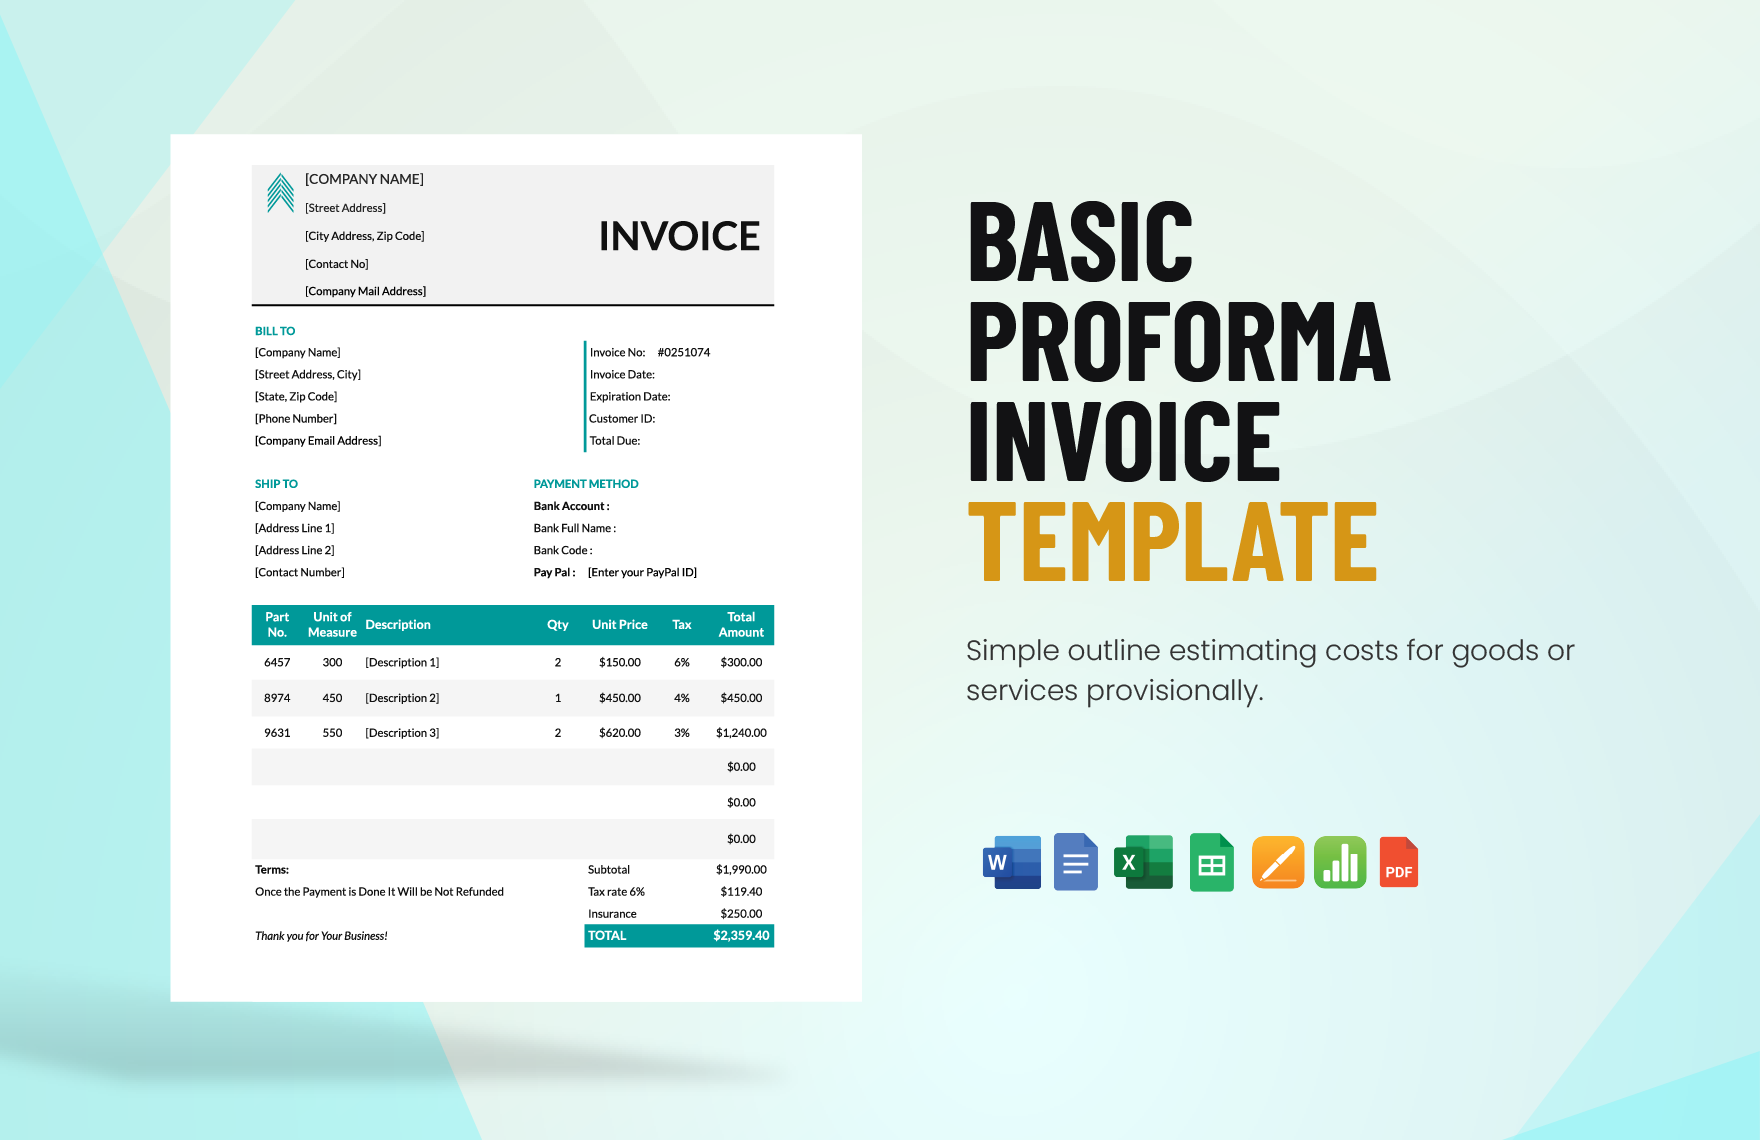 Free Basic Proforma Invoice Template in Word, Google Docs, Excel, PDF, Google Sheets, Apple Pages, Apple Numbers